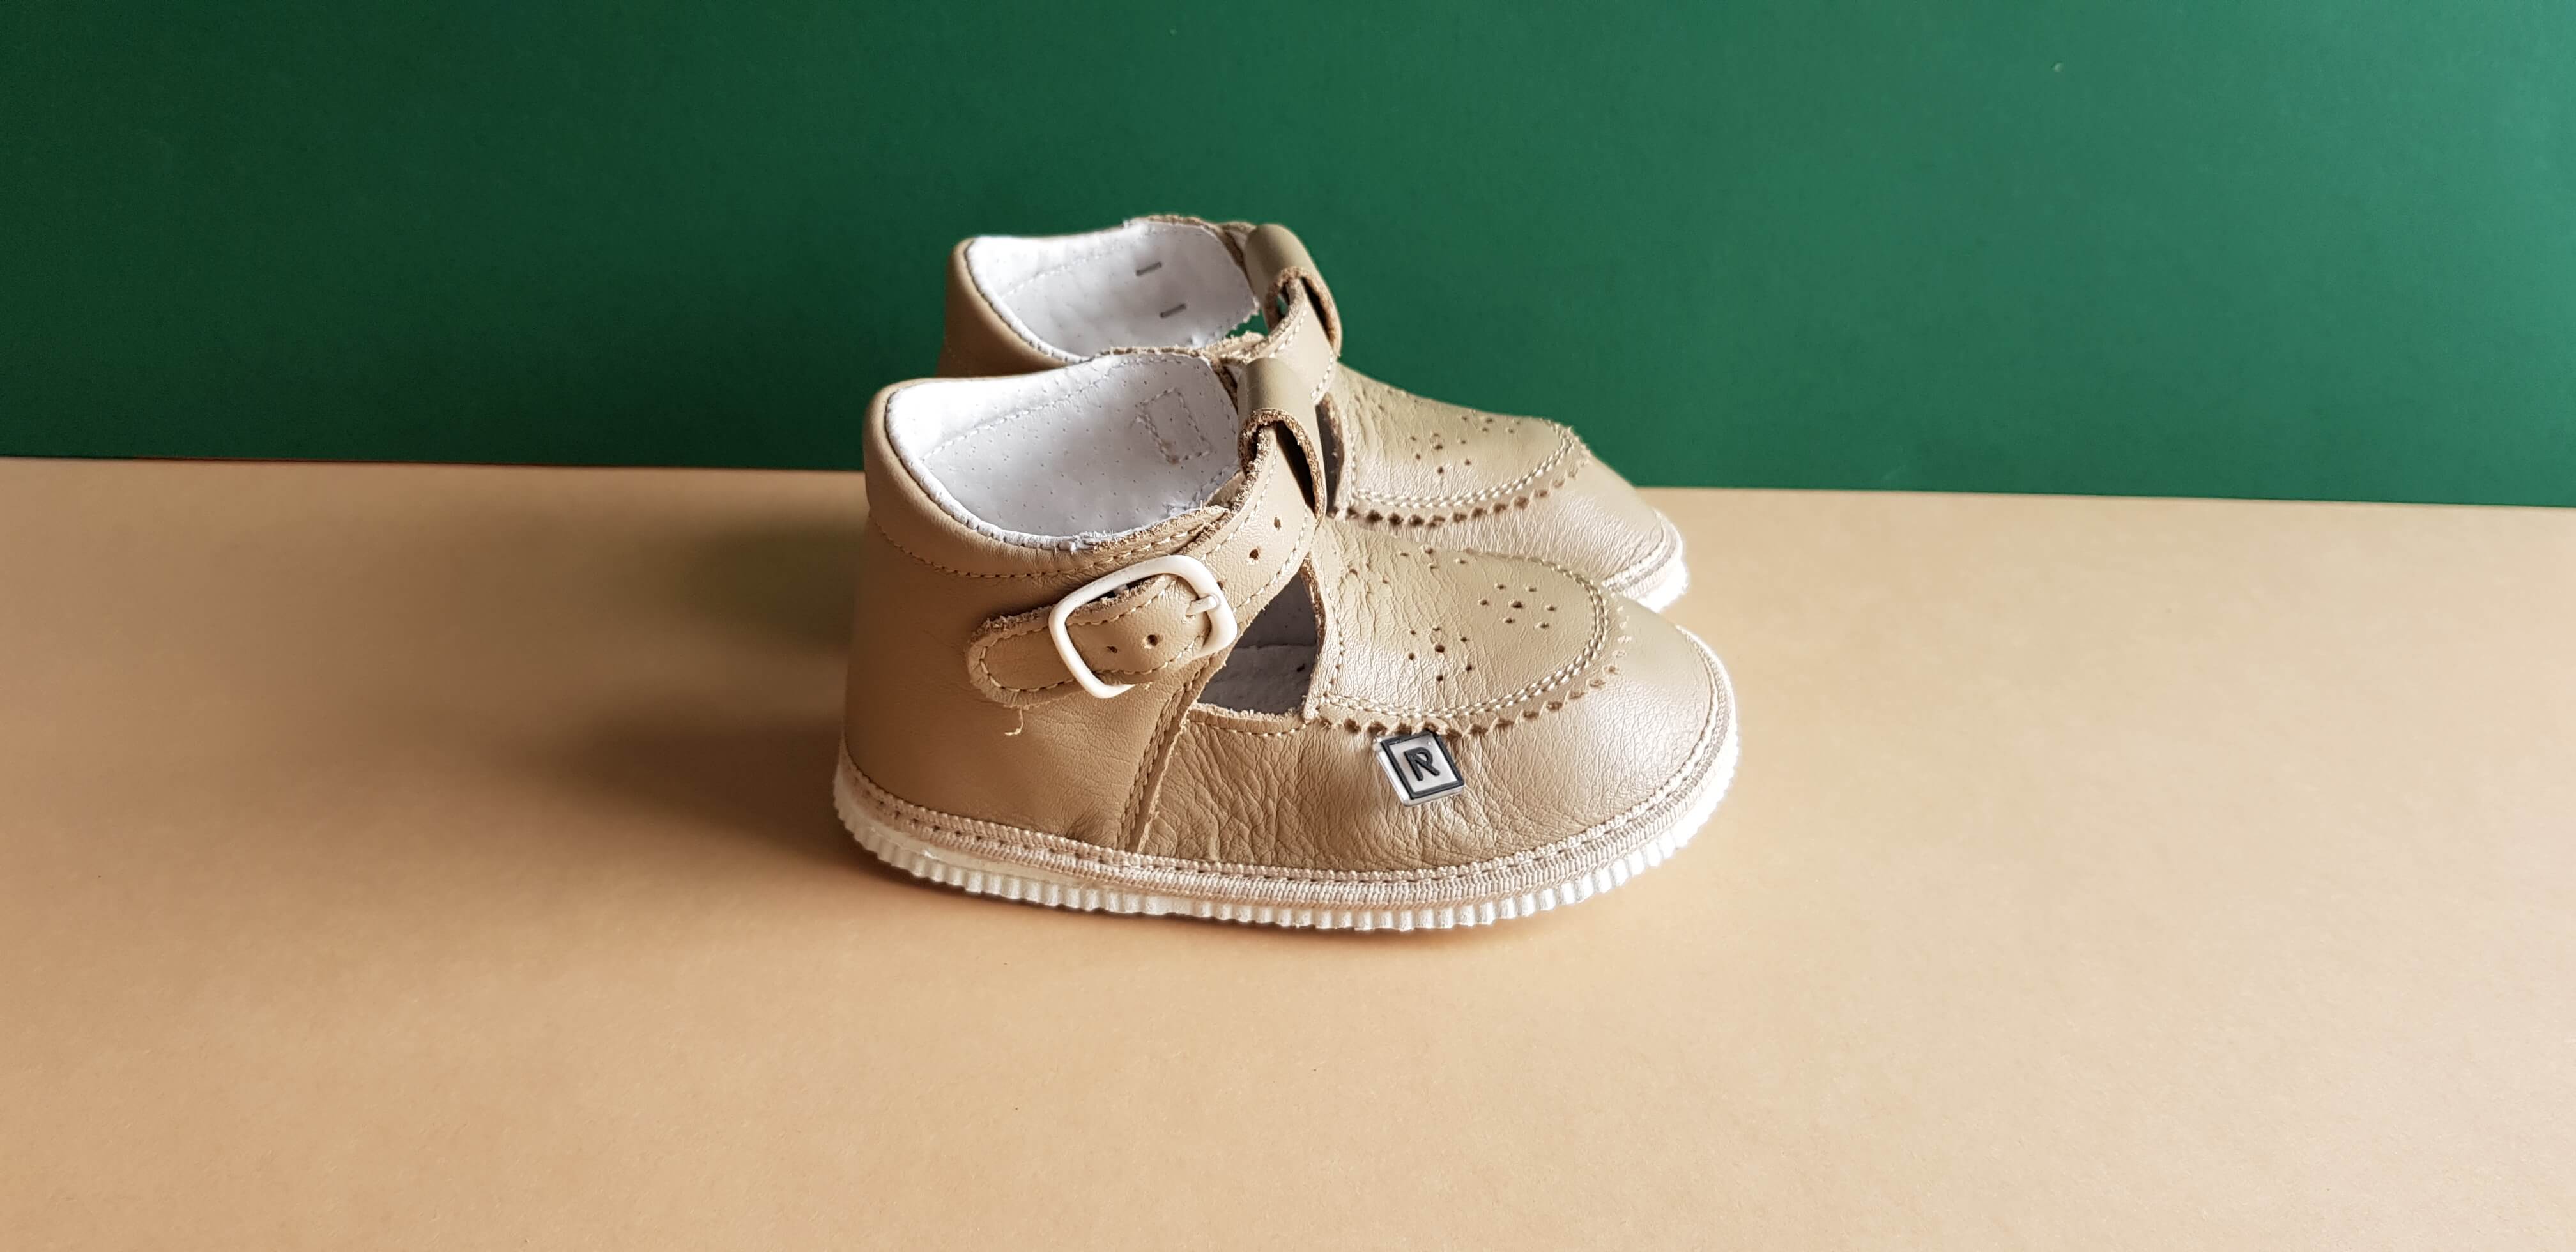 Cream first walking t-bar shoes for babies or toddlers with anatomically shaped toe box made from soft leather